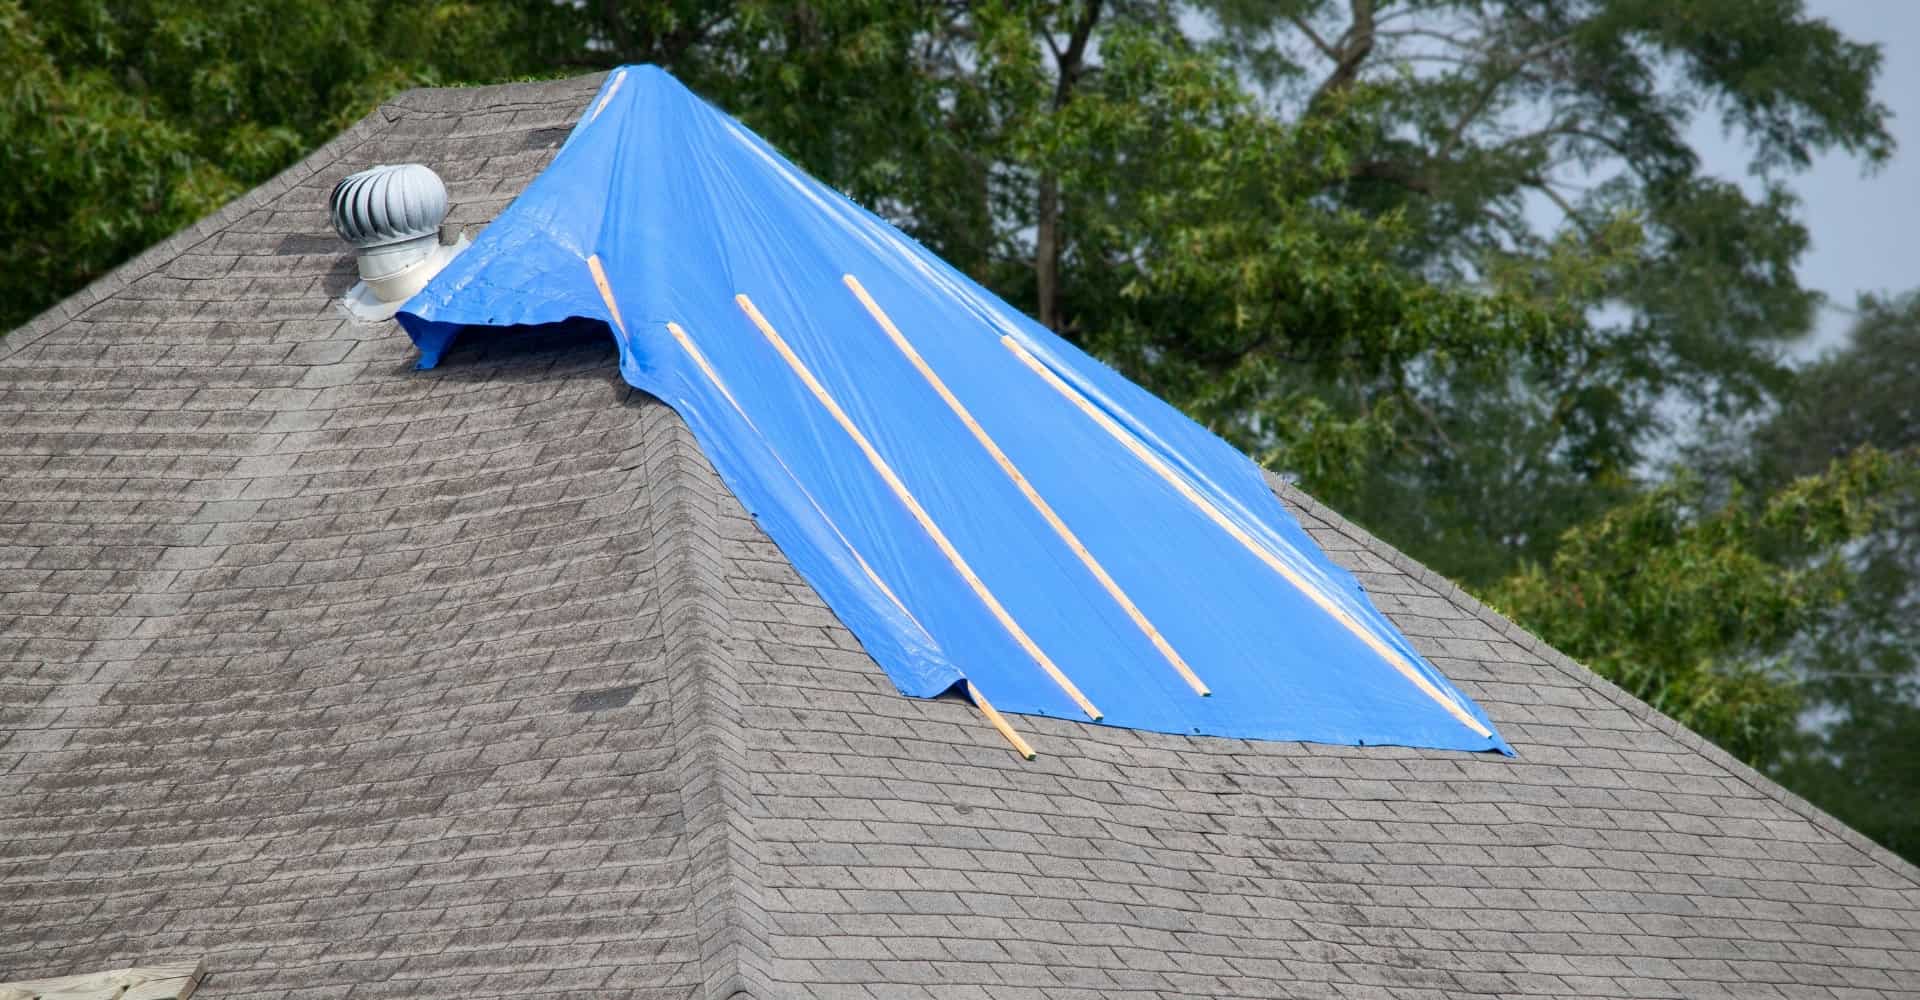 Alconero and Associates - Tips for filing a roof damage insurance claim